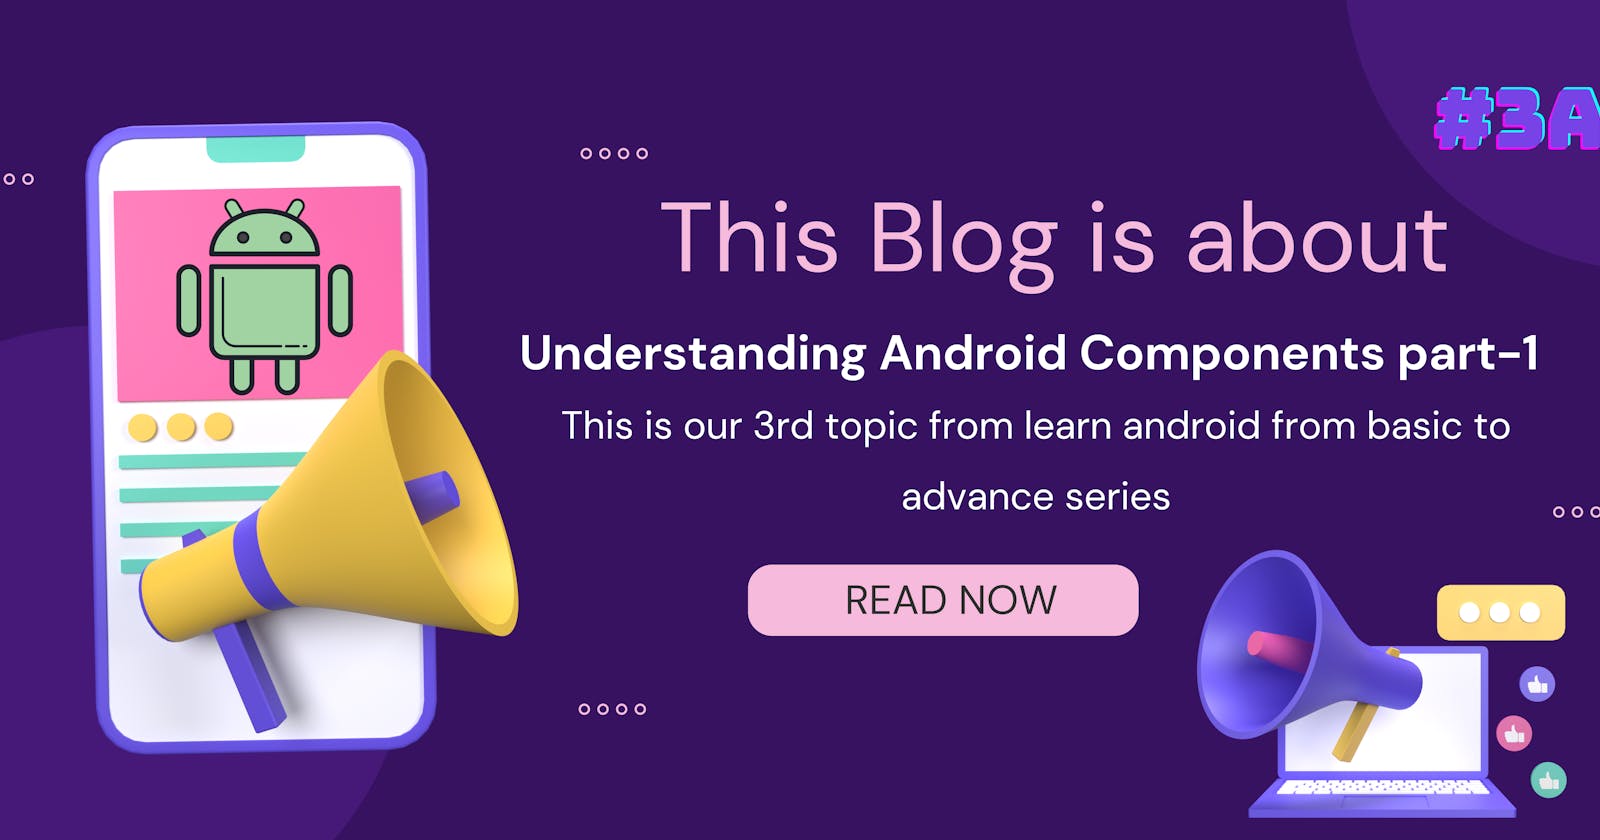 Topic 3: Understanding Android Components Part-1